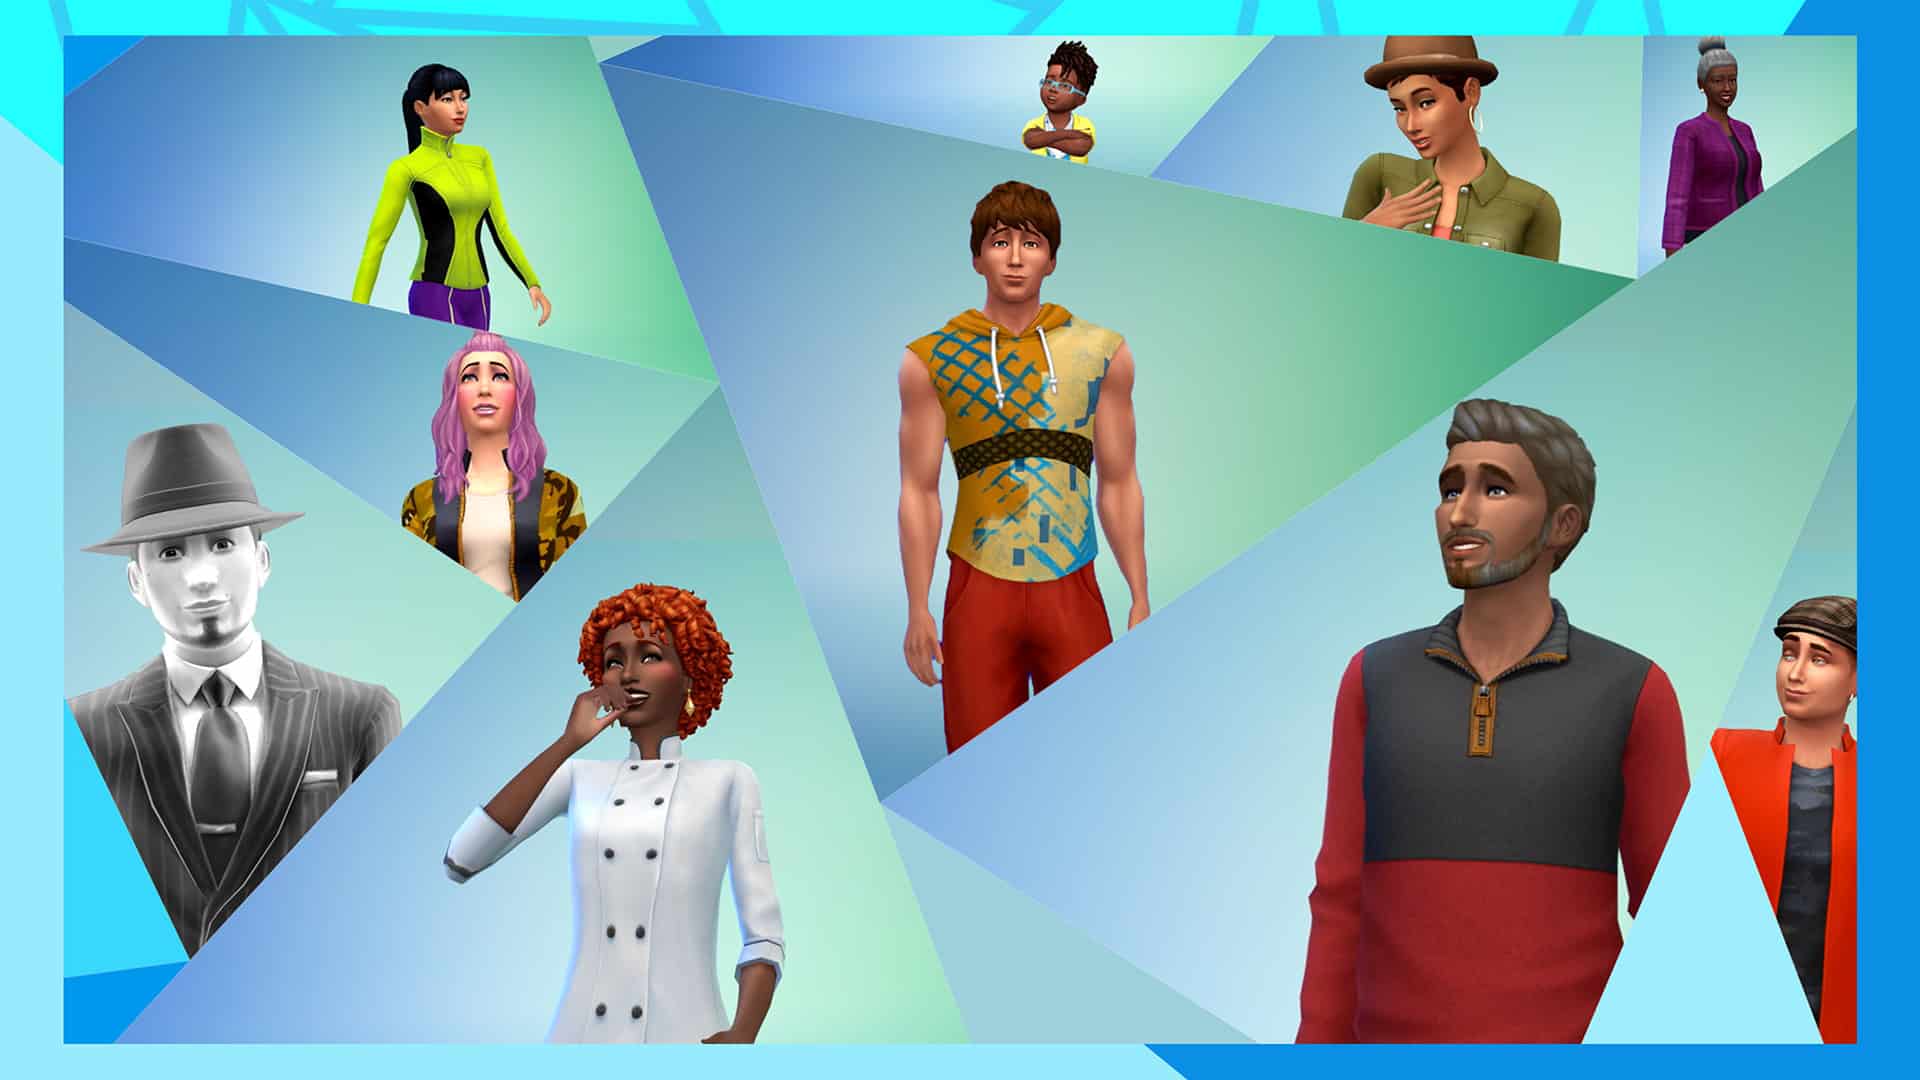 The Sims 4 has a wide variety of characters for you to build.